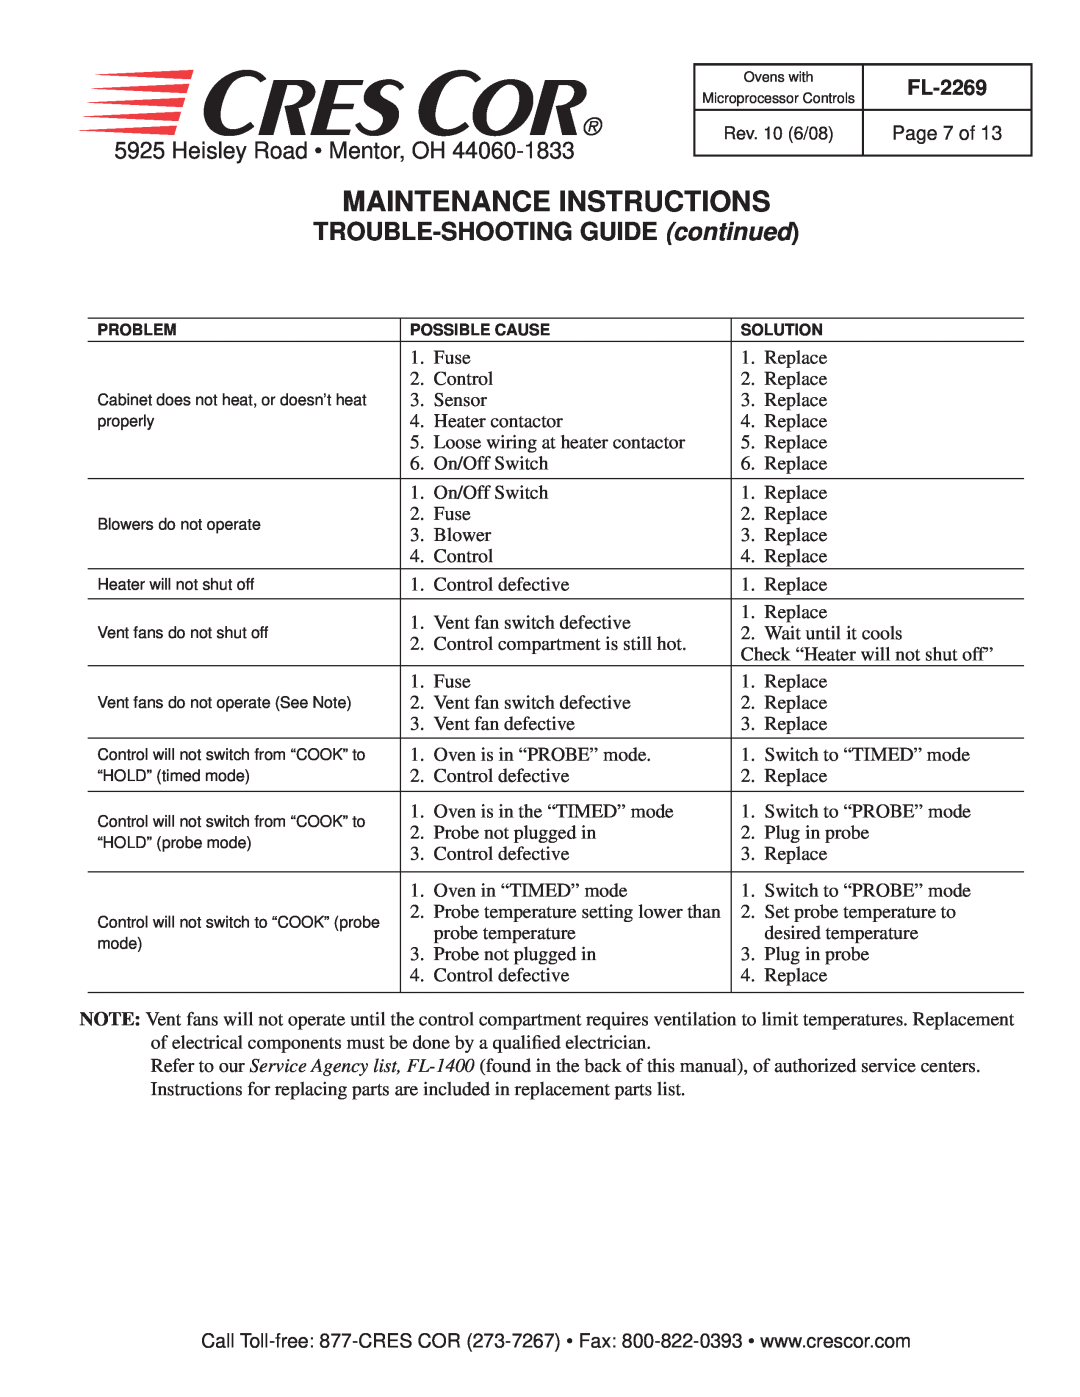 Cres Cor CO151FUA12B-Q1 manual TROUBLE-SHOOTING GUIDE continued, Maintenance Instructions, Heisley Road Mentor, OH, FL-2269 